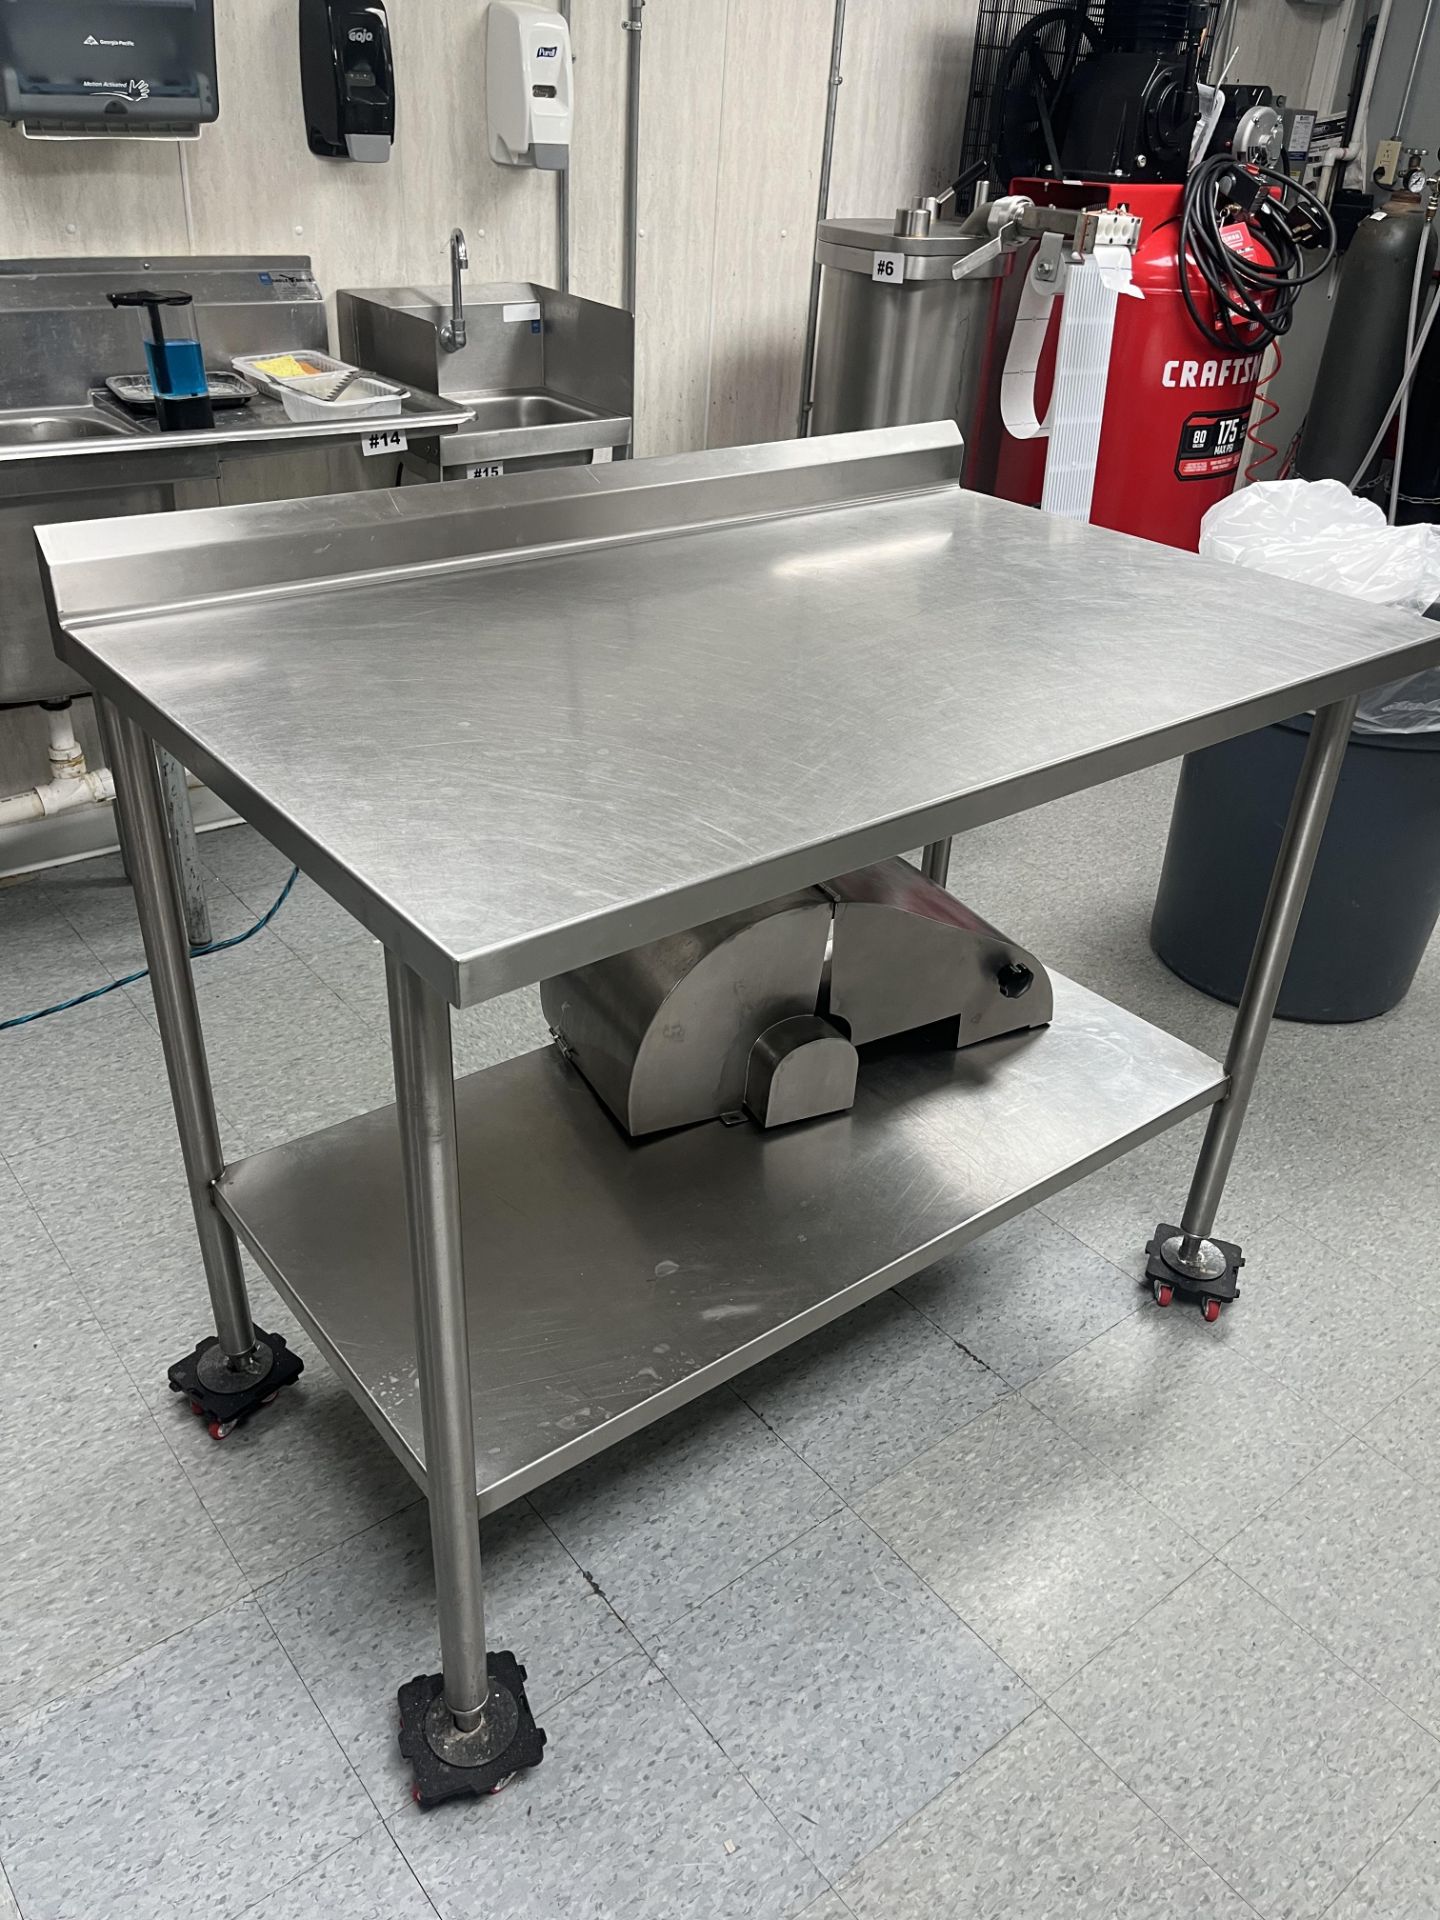 STAINLESS STEEL TABLE (DIMS 48"L 27"W) (Located Cleveland, OH)